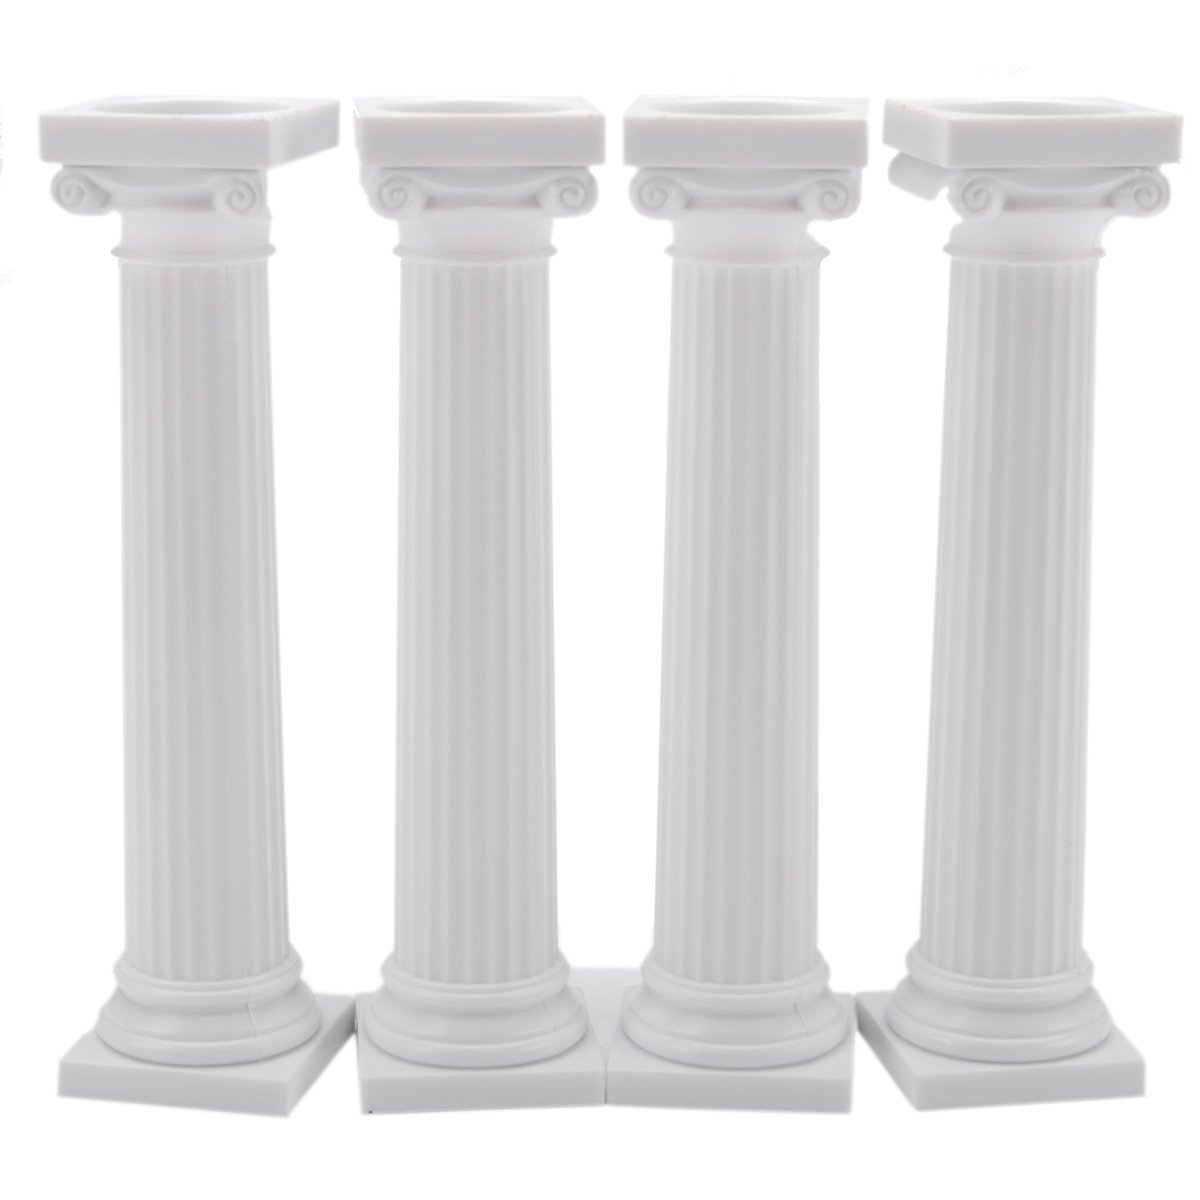 Wilton 303-3703 4-Pack Grecian Pillars for Cakes, 5-Inch - image 2 of 5